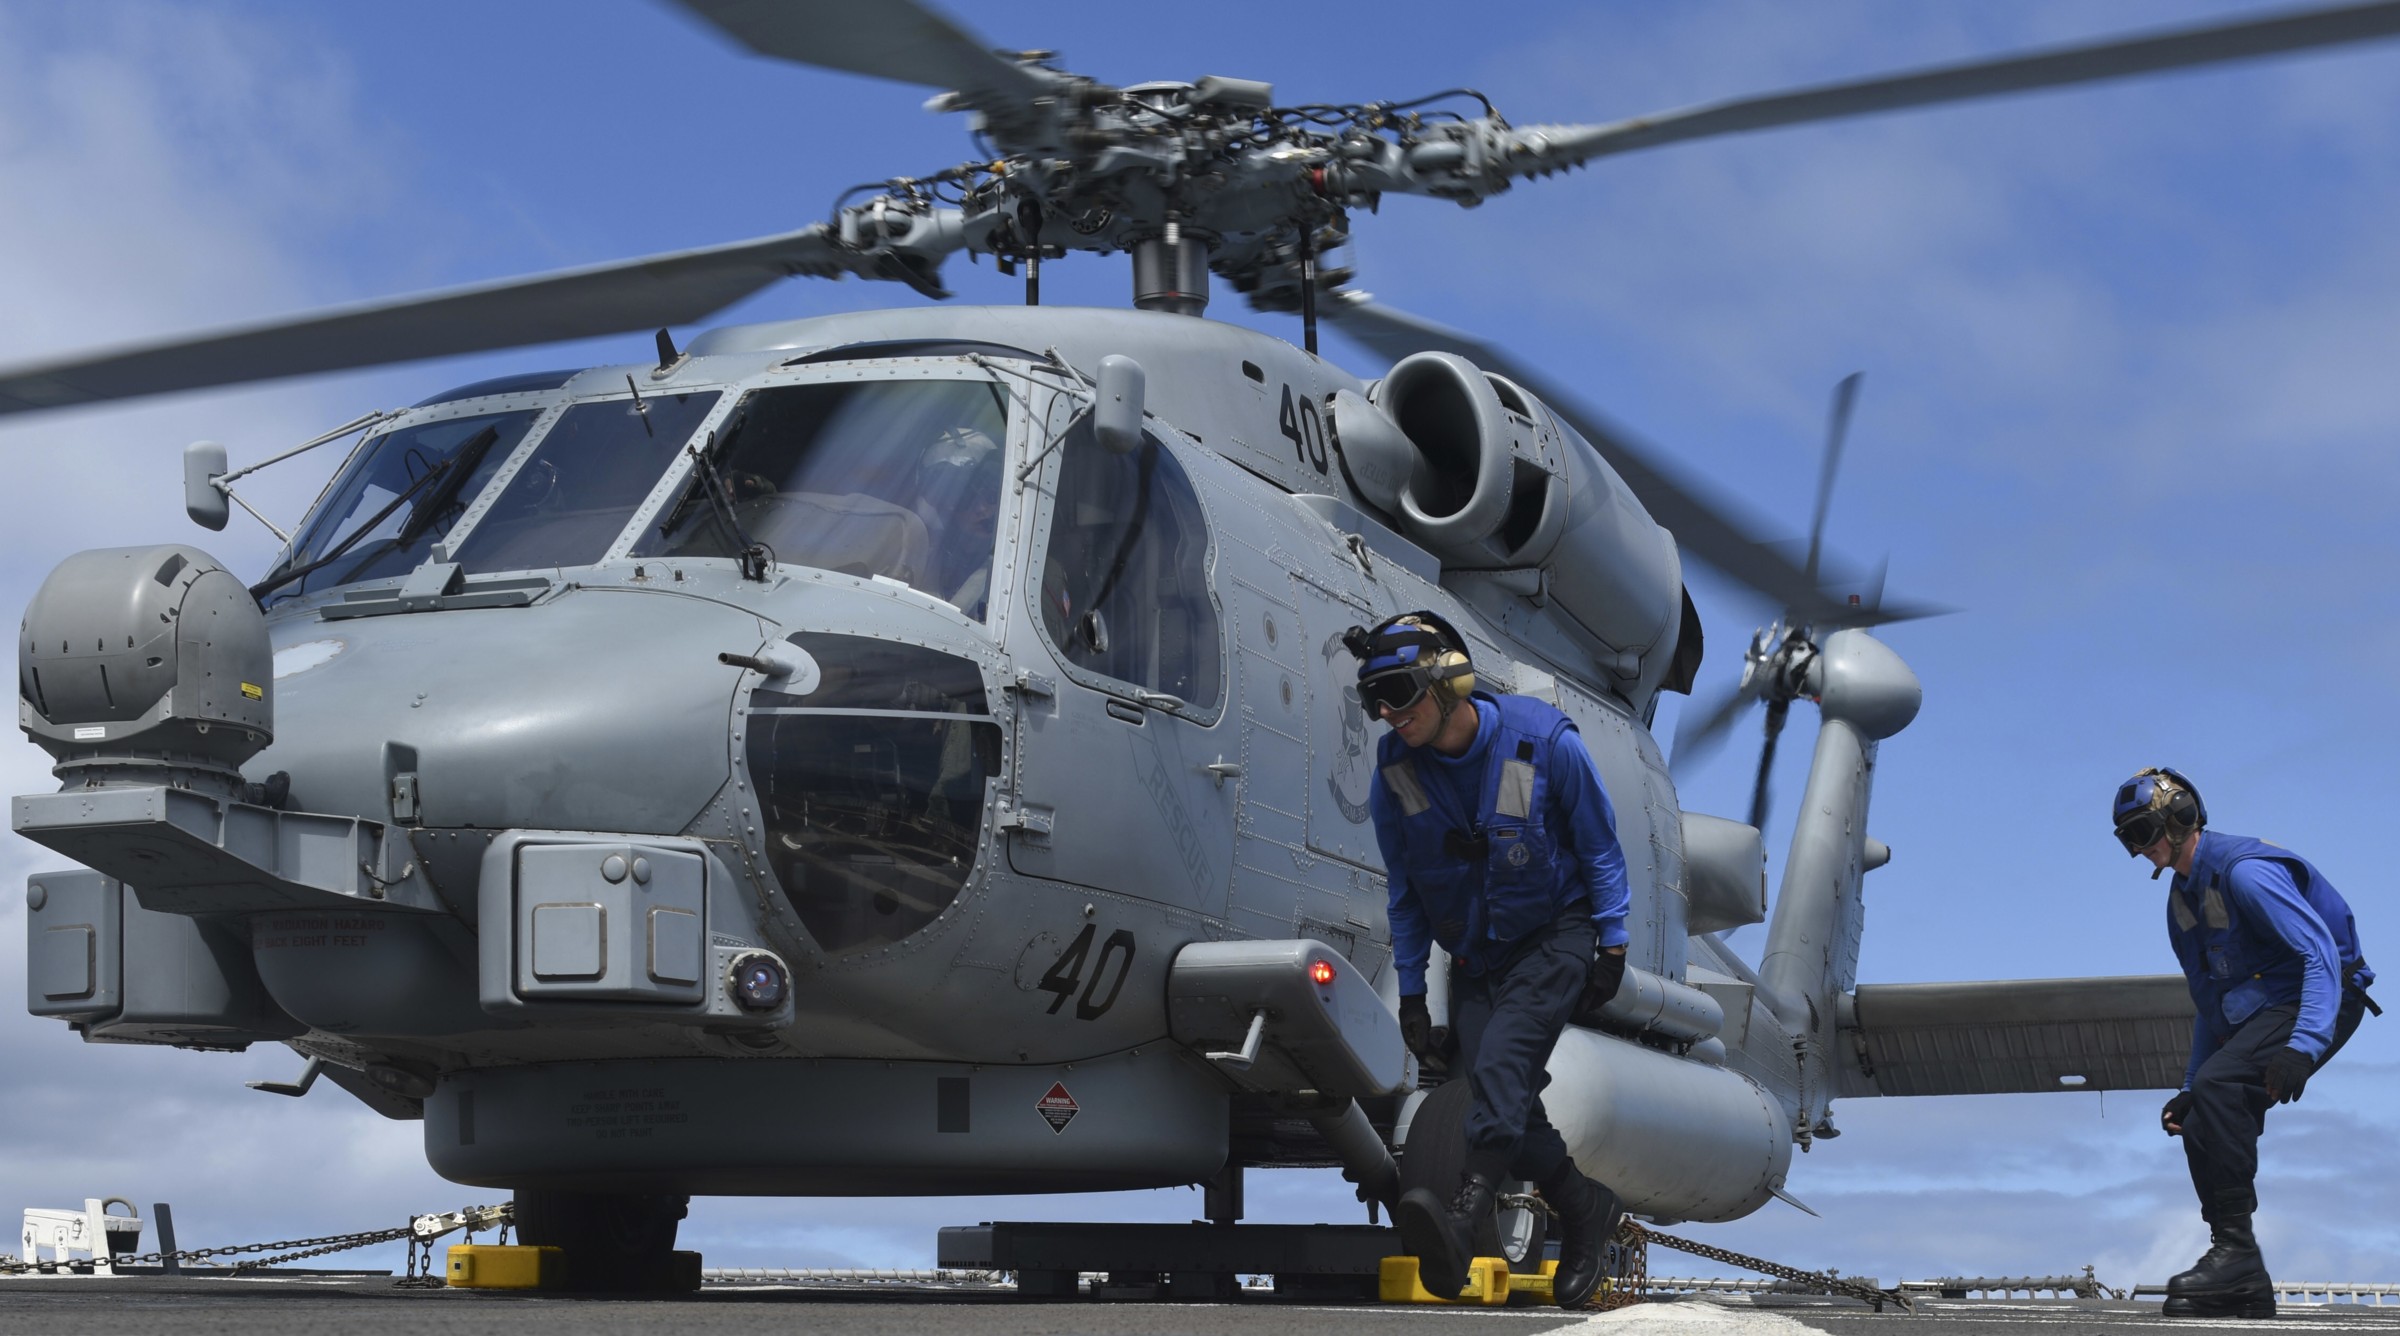 hsm-35 magicians helicopter maritime strike squadron us navy mh-60r seahawk uss shoup ddg-86 40